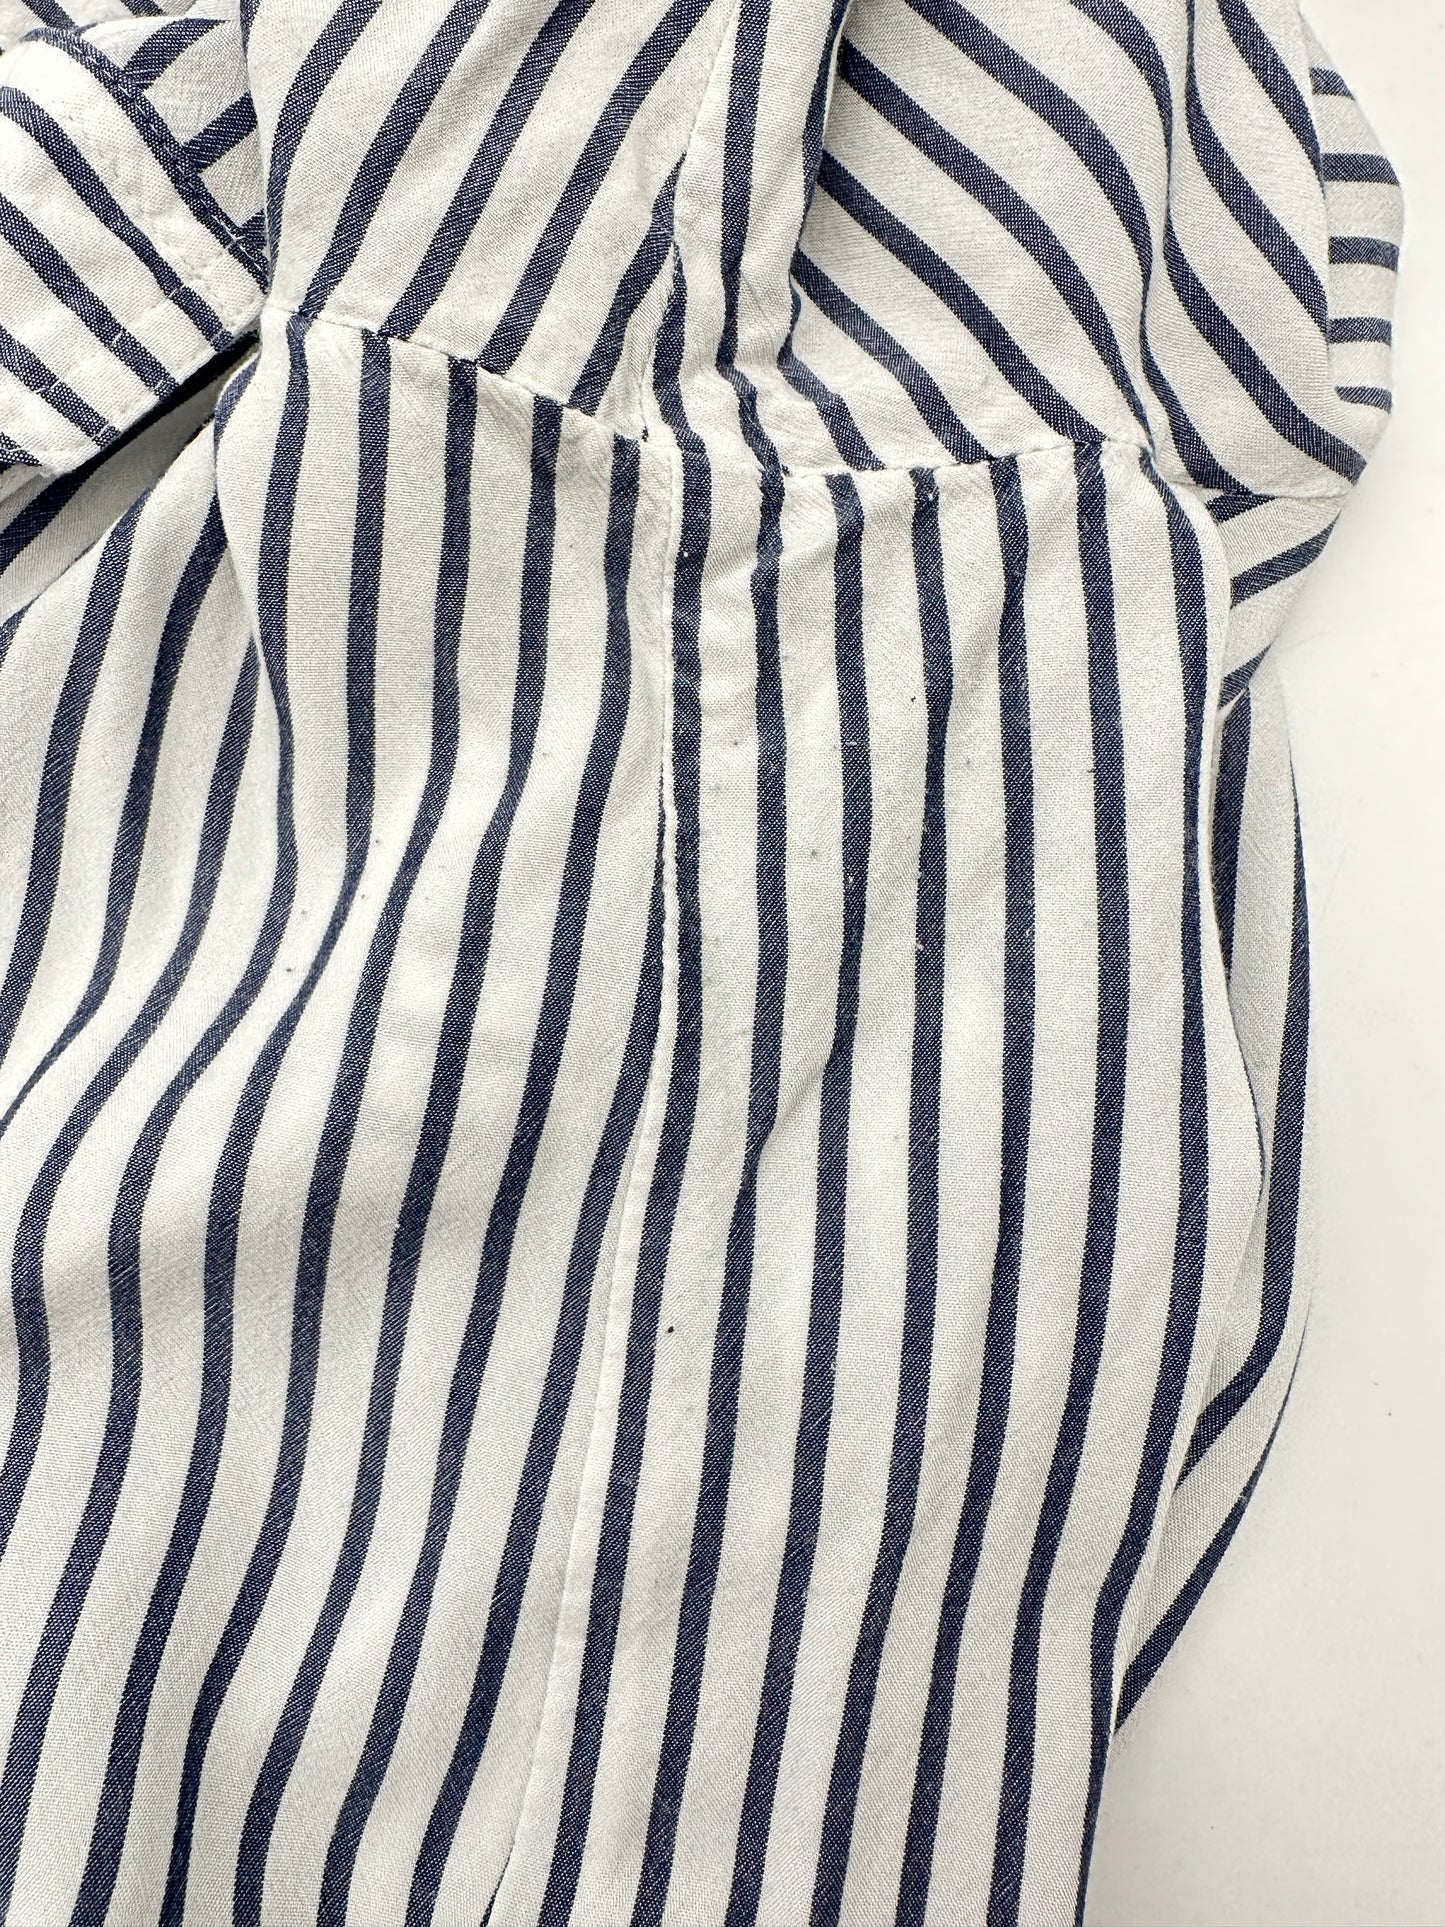 J.Jill Size M Blue & White Striped Roll-Tab Sleeve Blouse Button-Up Top